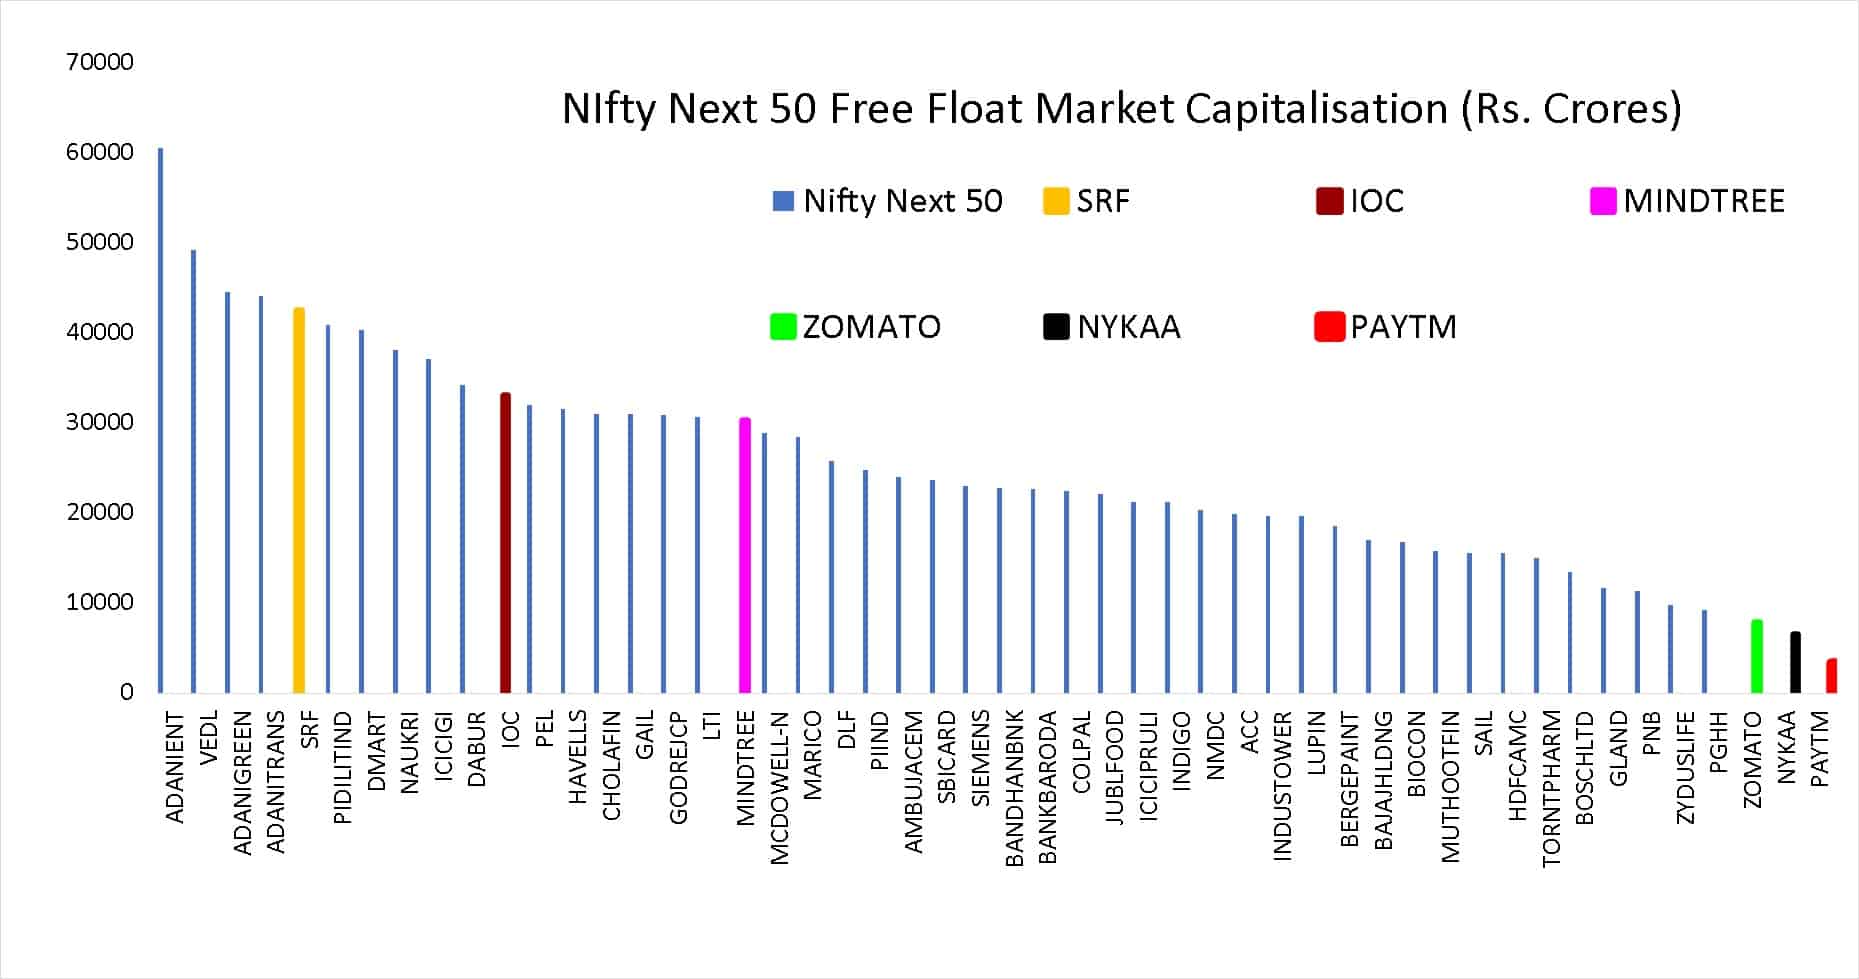 Nifty Next 50 Free Float Market Capitalisation (Rs. Crores) with the positions of new entrants indicated